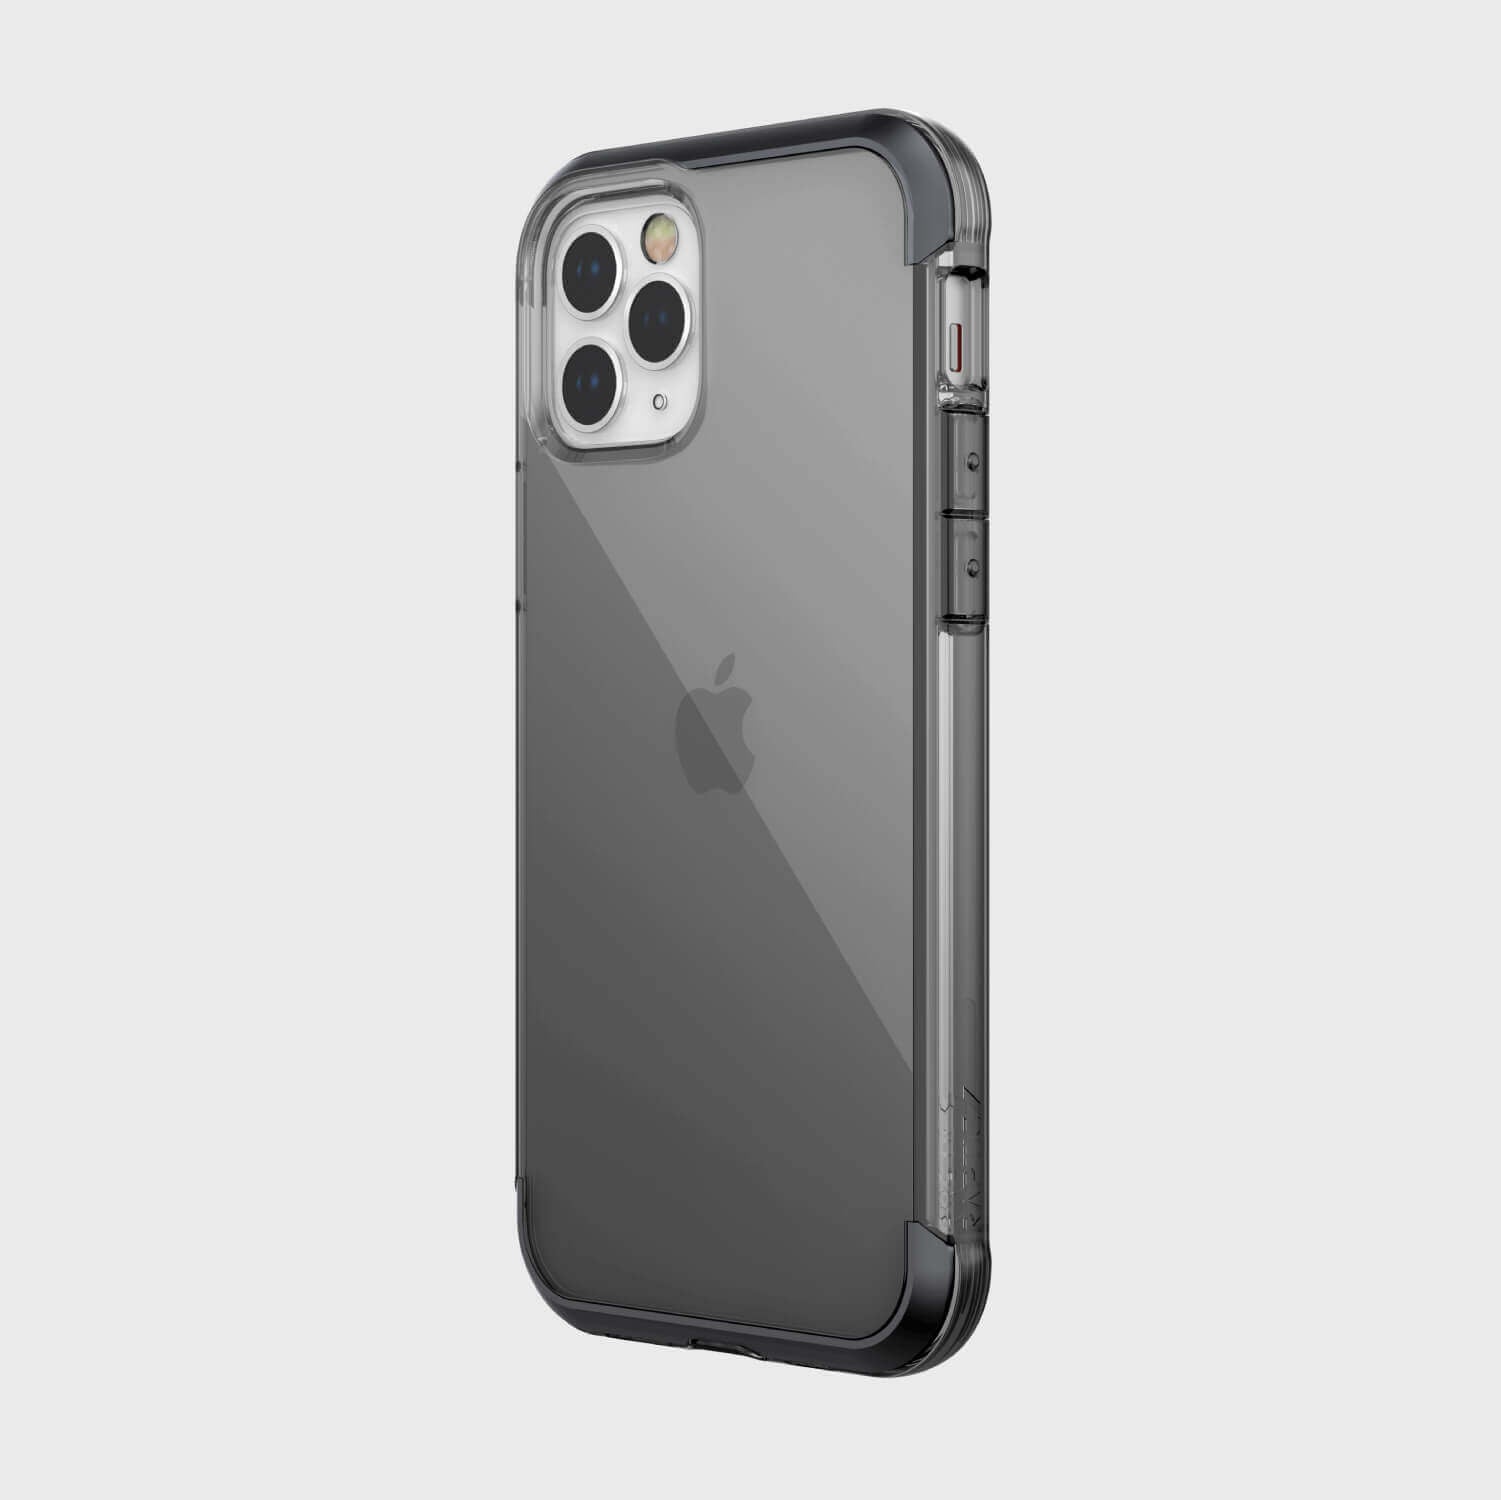 Showing a iPhone 12 Pro in a black clear Raptic Air case